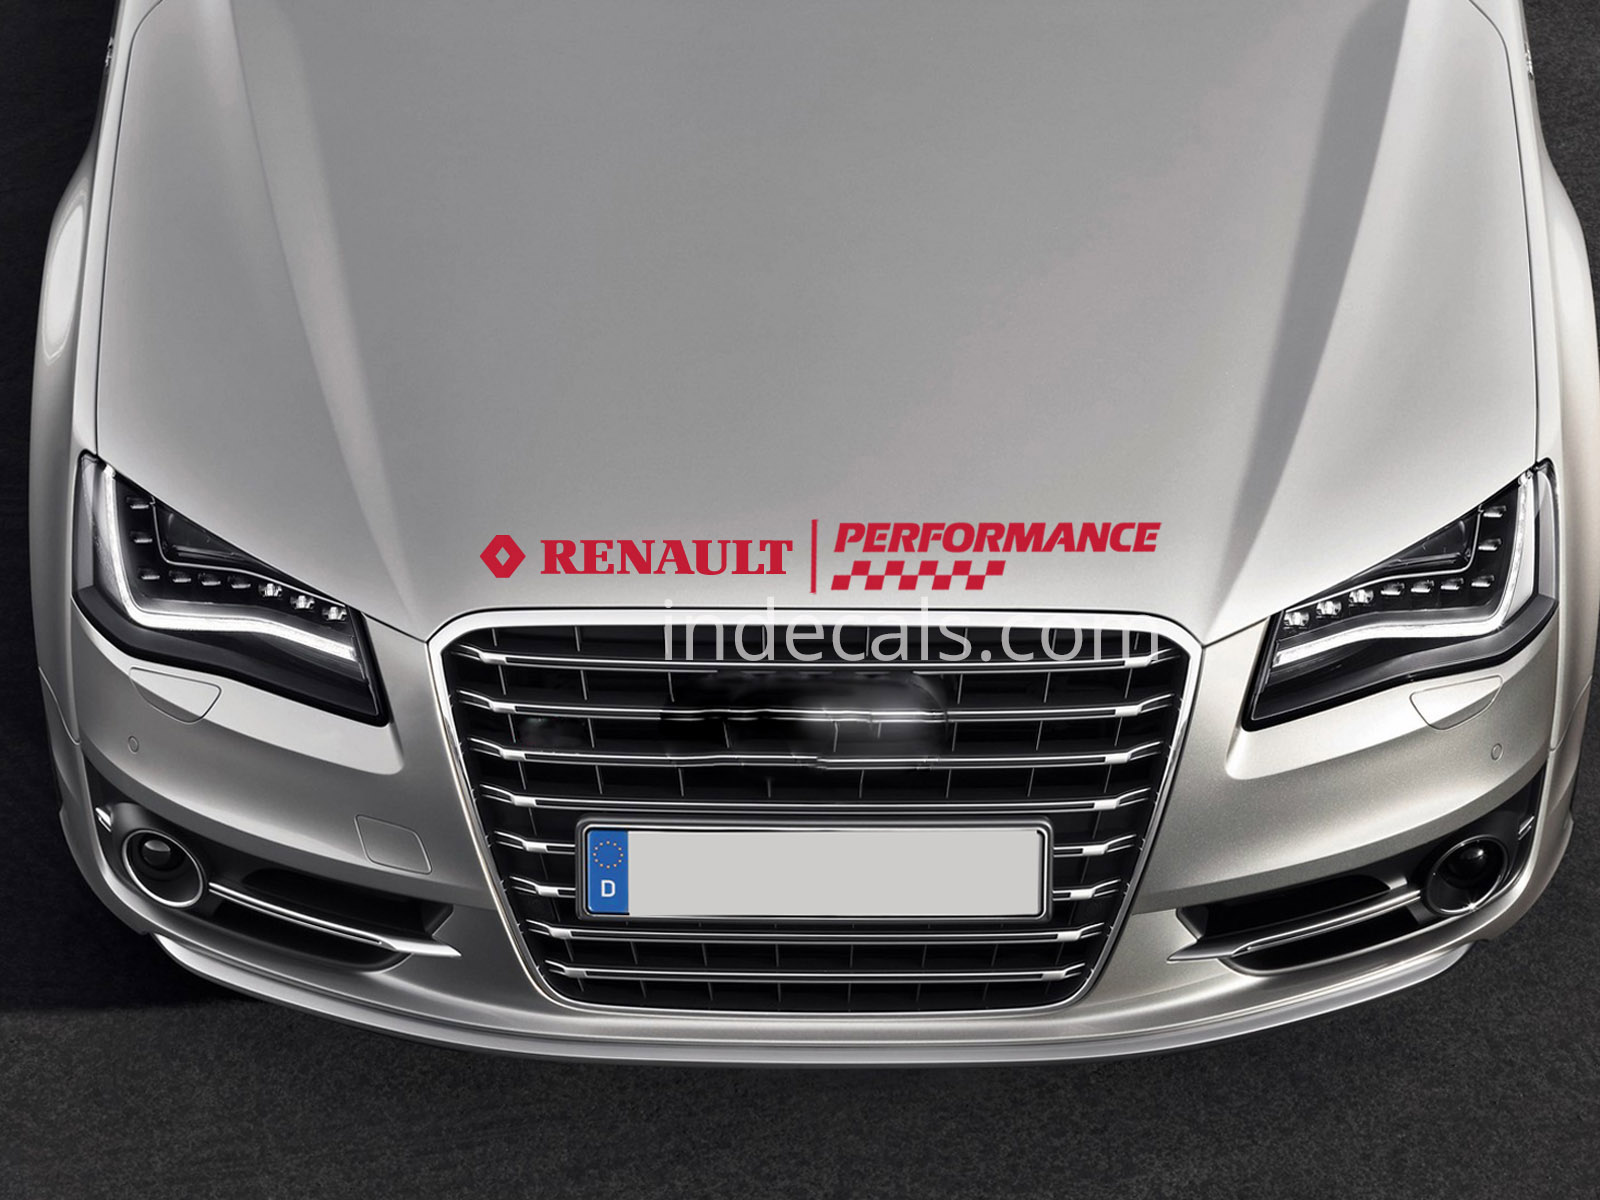 1 x Renault Performance Sticker for Bonnet - Red